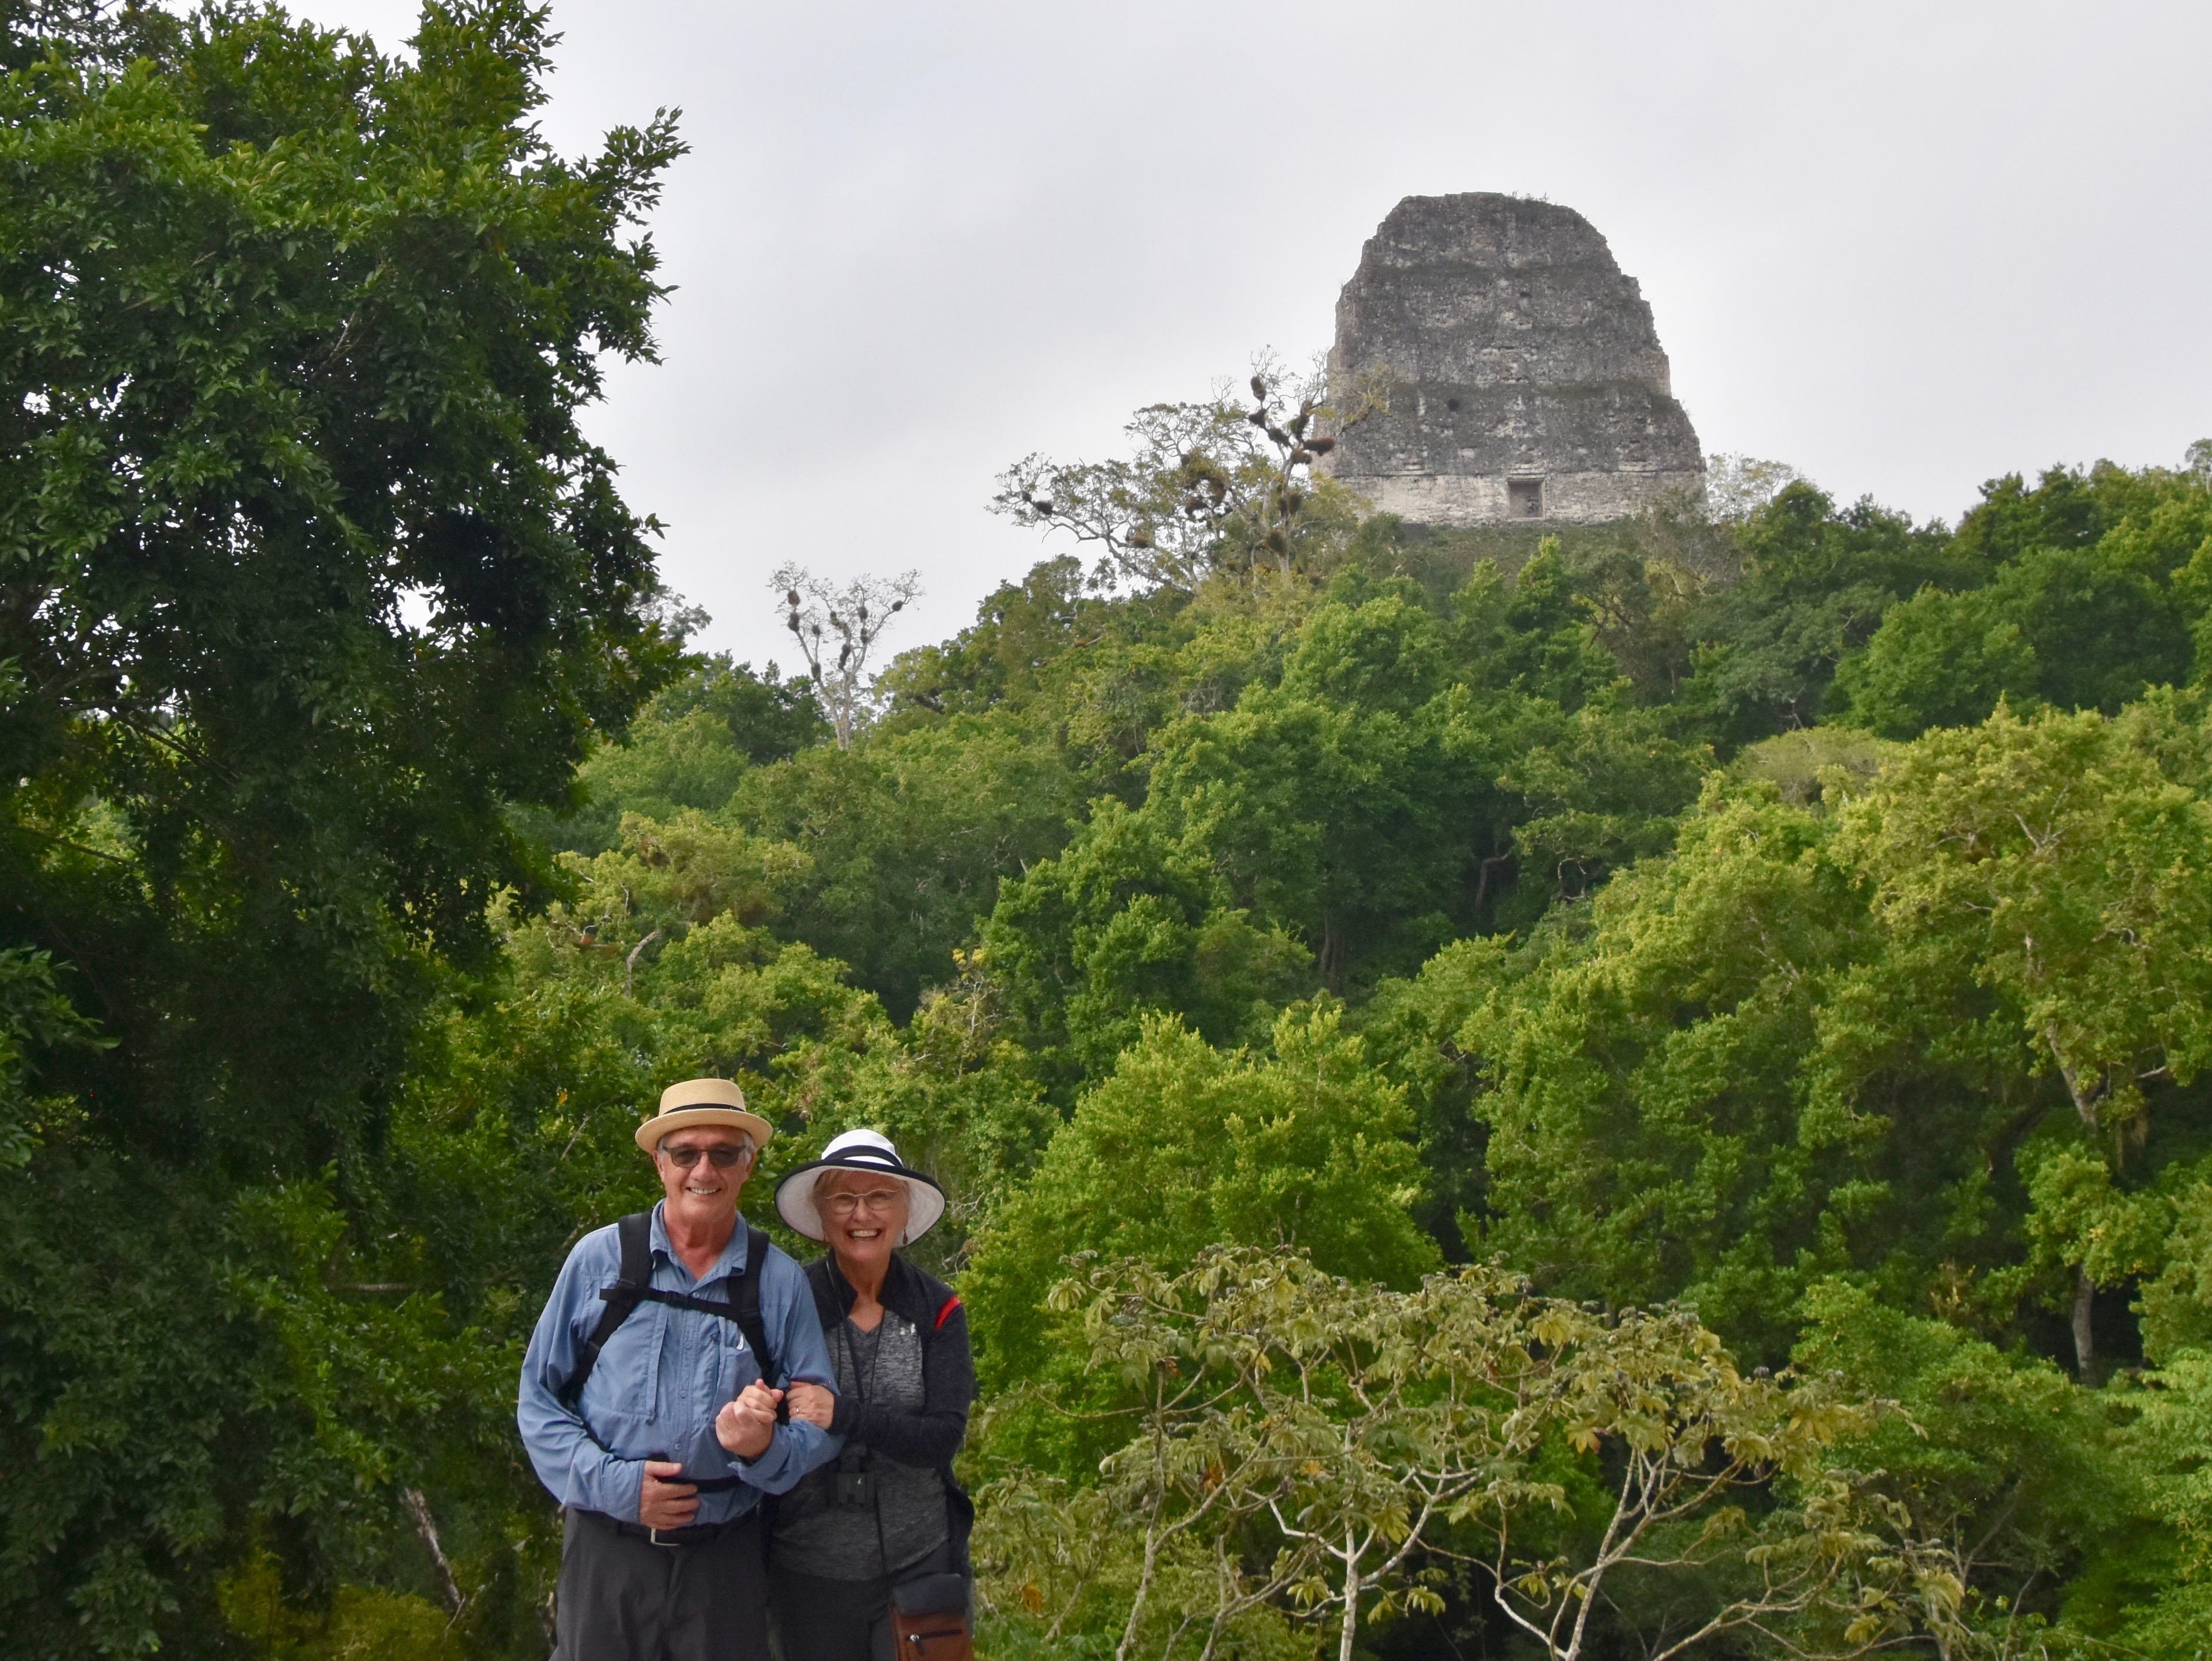 At Tikal - Standing on a Ledge